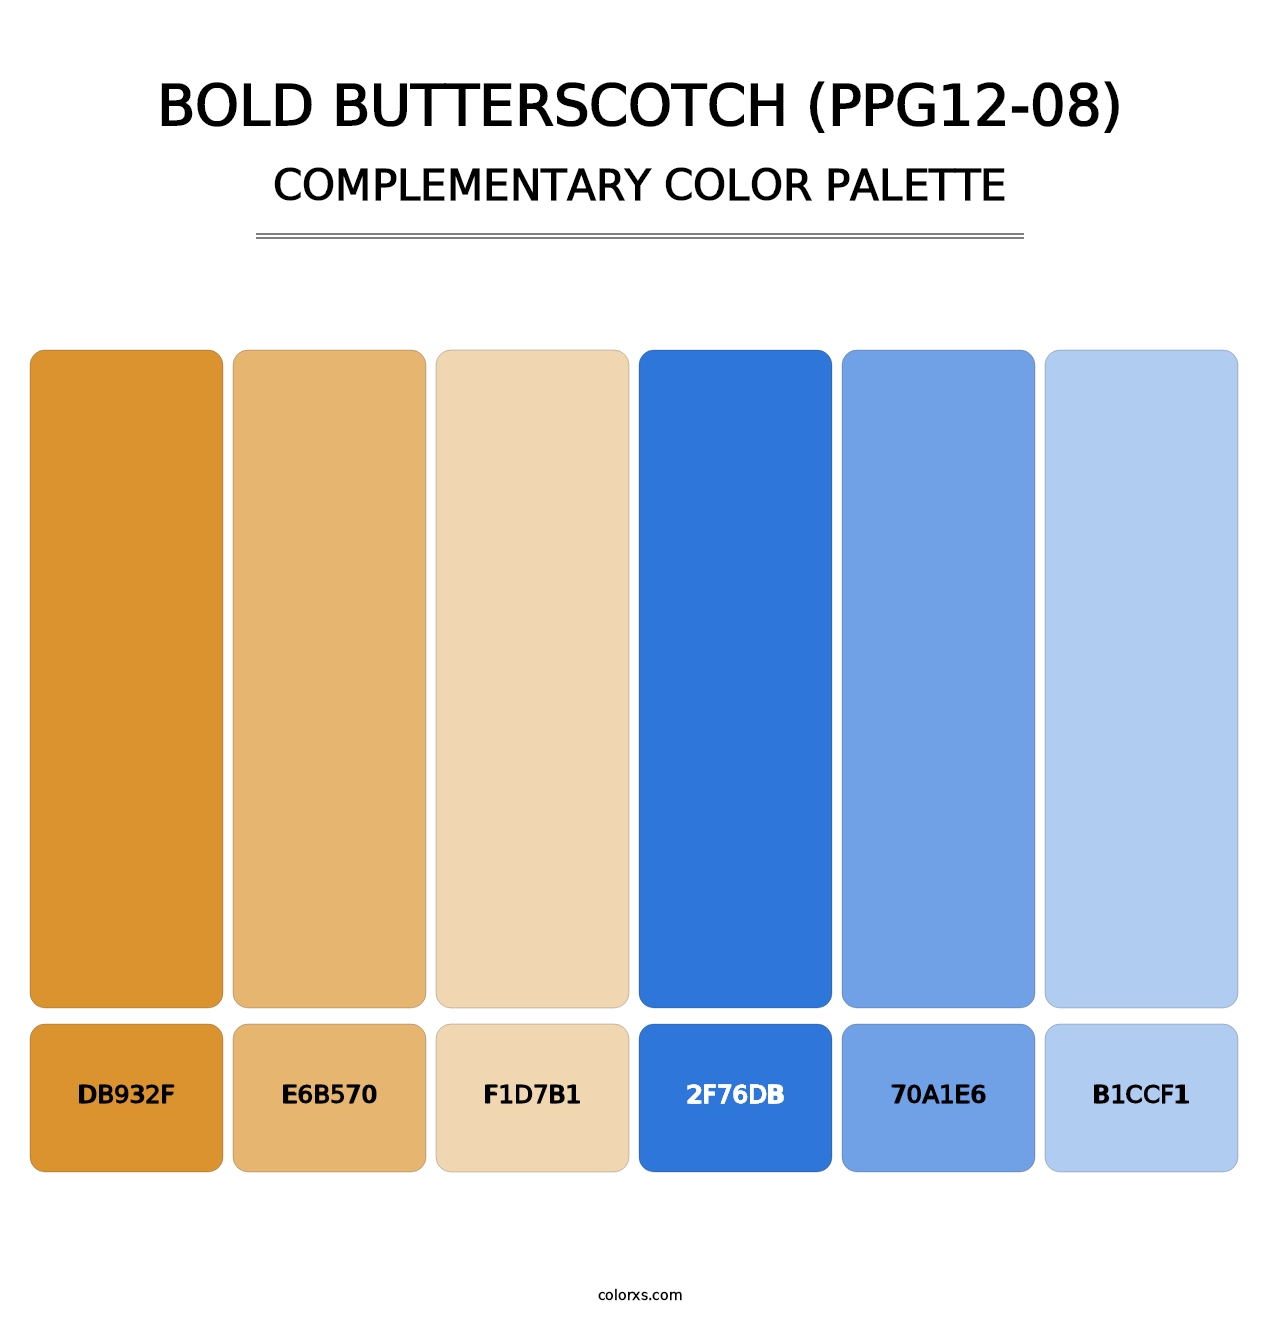 Bold Butterscotch (PPG12-08) - Complementary Color Palette